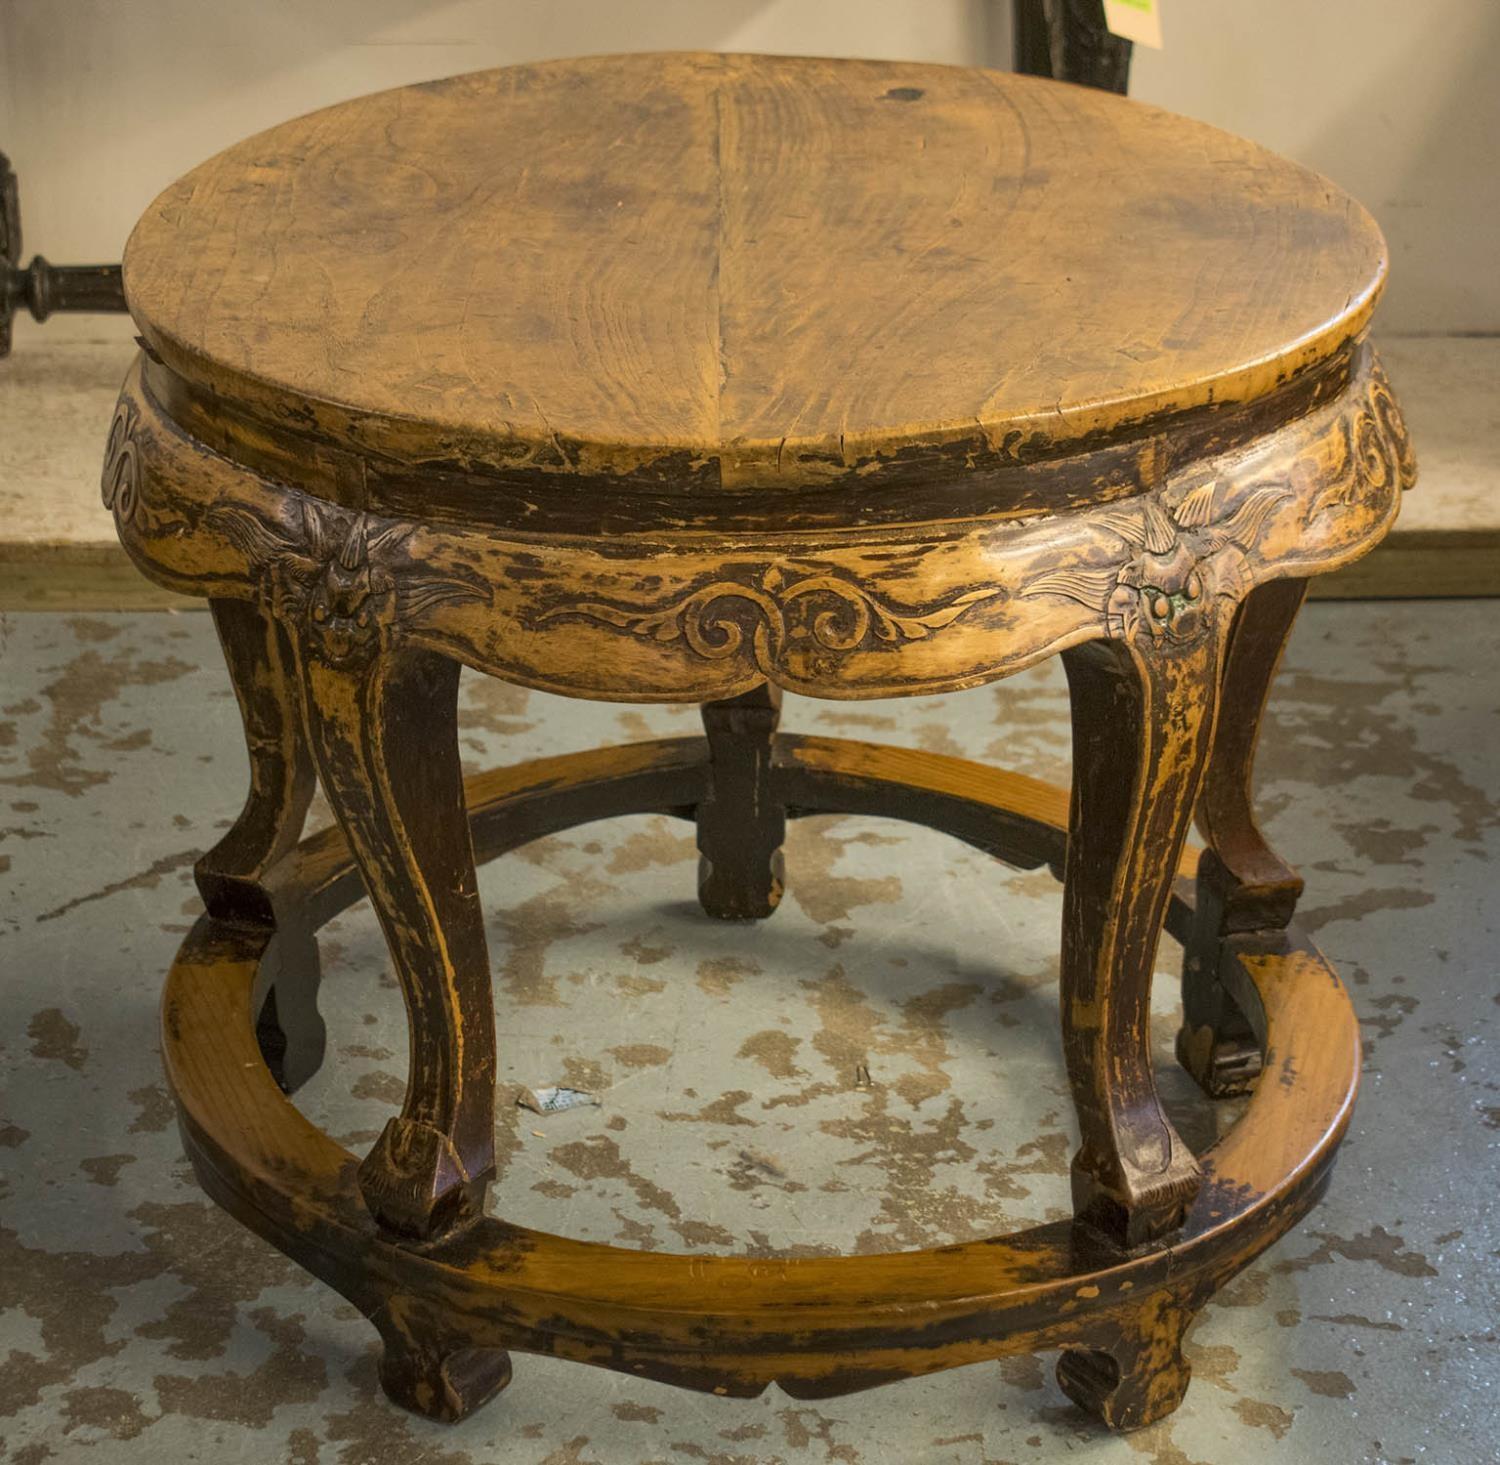 CENTRE TABLE, 19th century Chinese elm with a circular top, 82cm diam x 69cm H. (with faults)